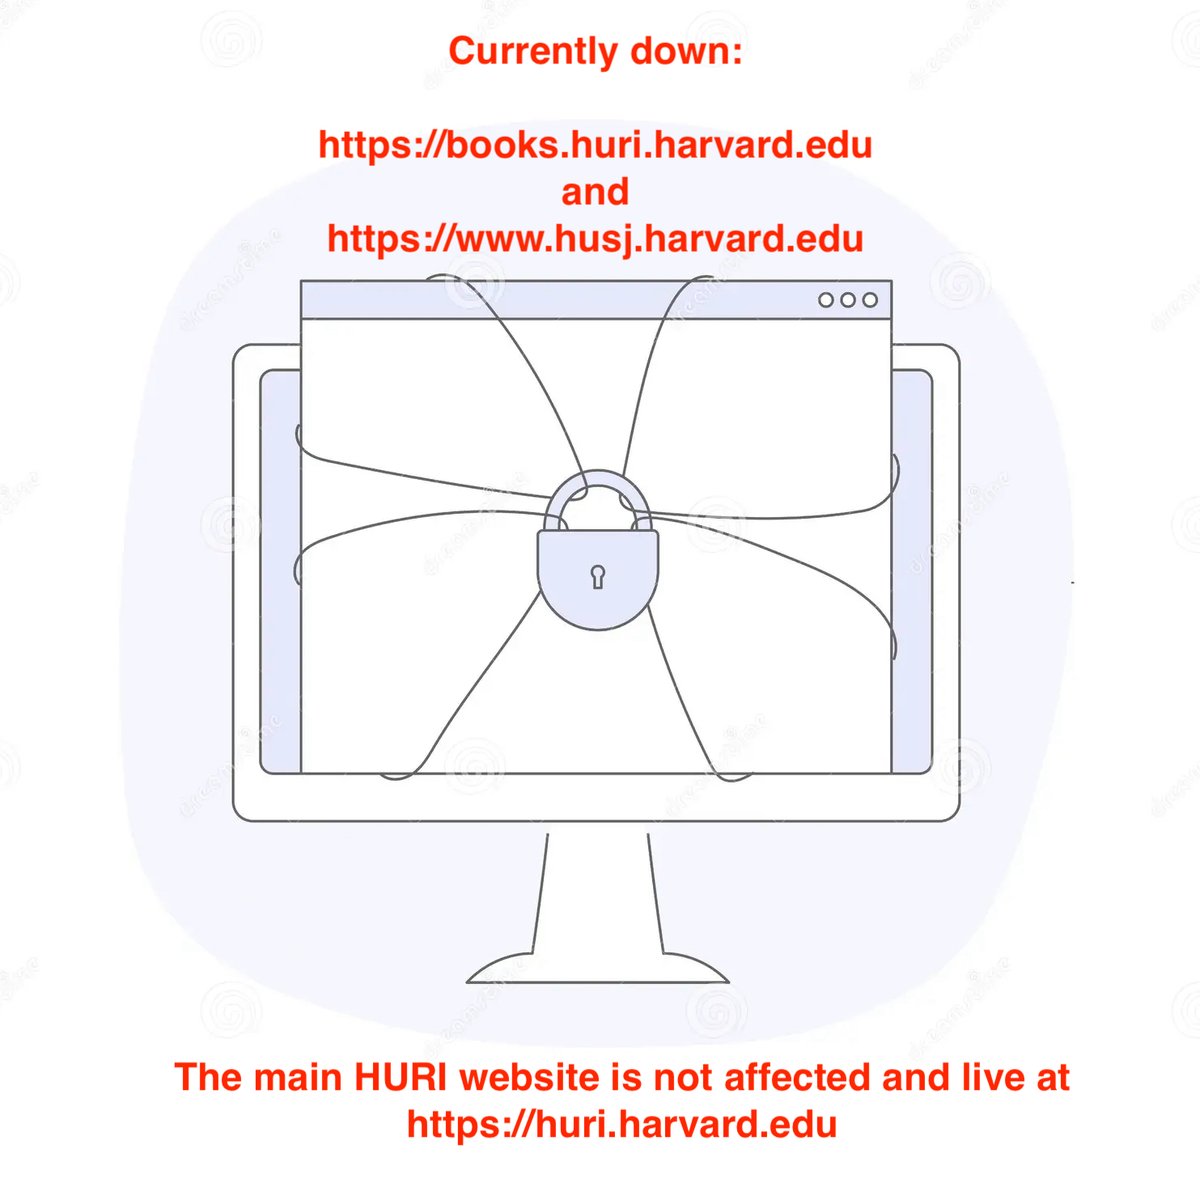 Our websites for #HURIbooks and the #HarvardUkrainianStudies journal are down due to a hacking attempt until further notice. Our understanding is that a possible breach has been contained. The main @HURI_Harvard website was not affected by this. Please bear with us as we work…